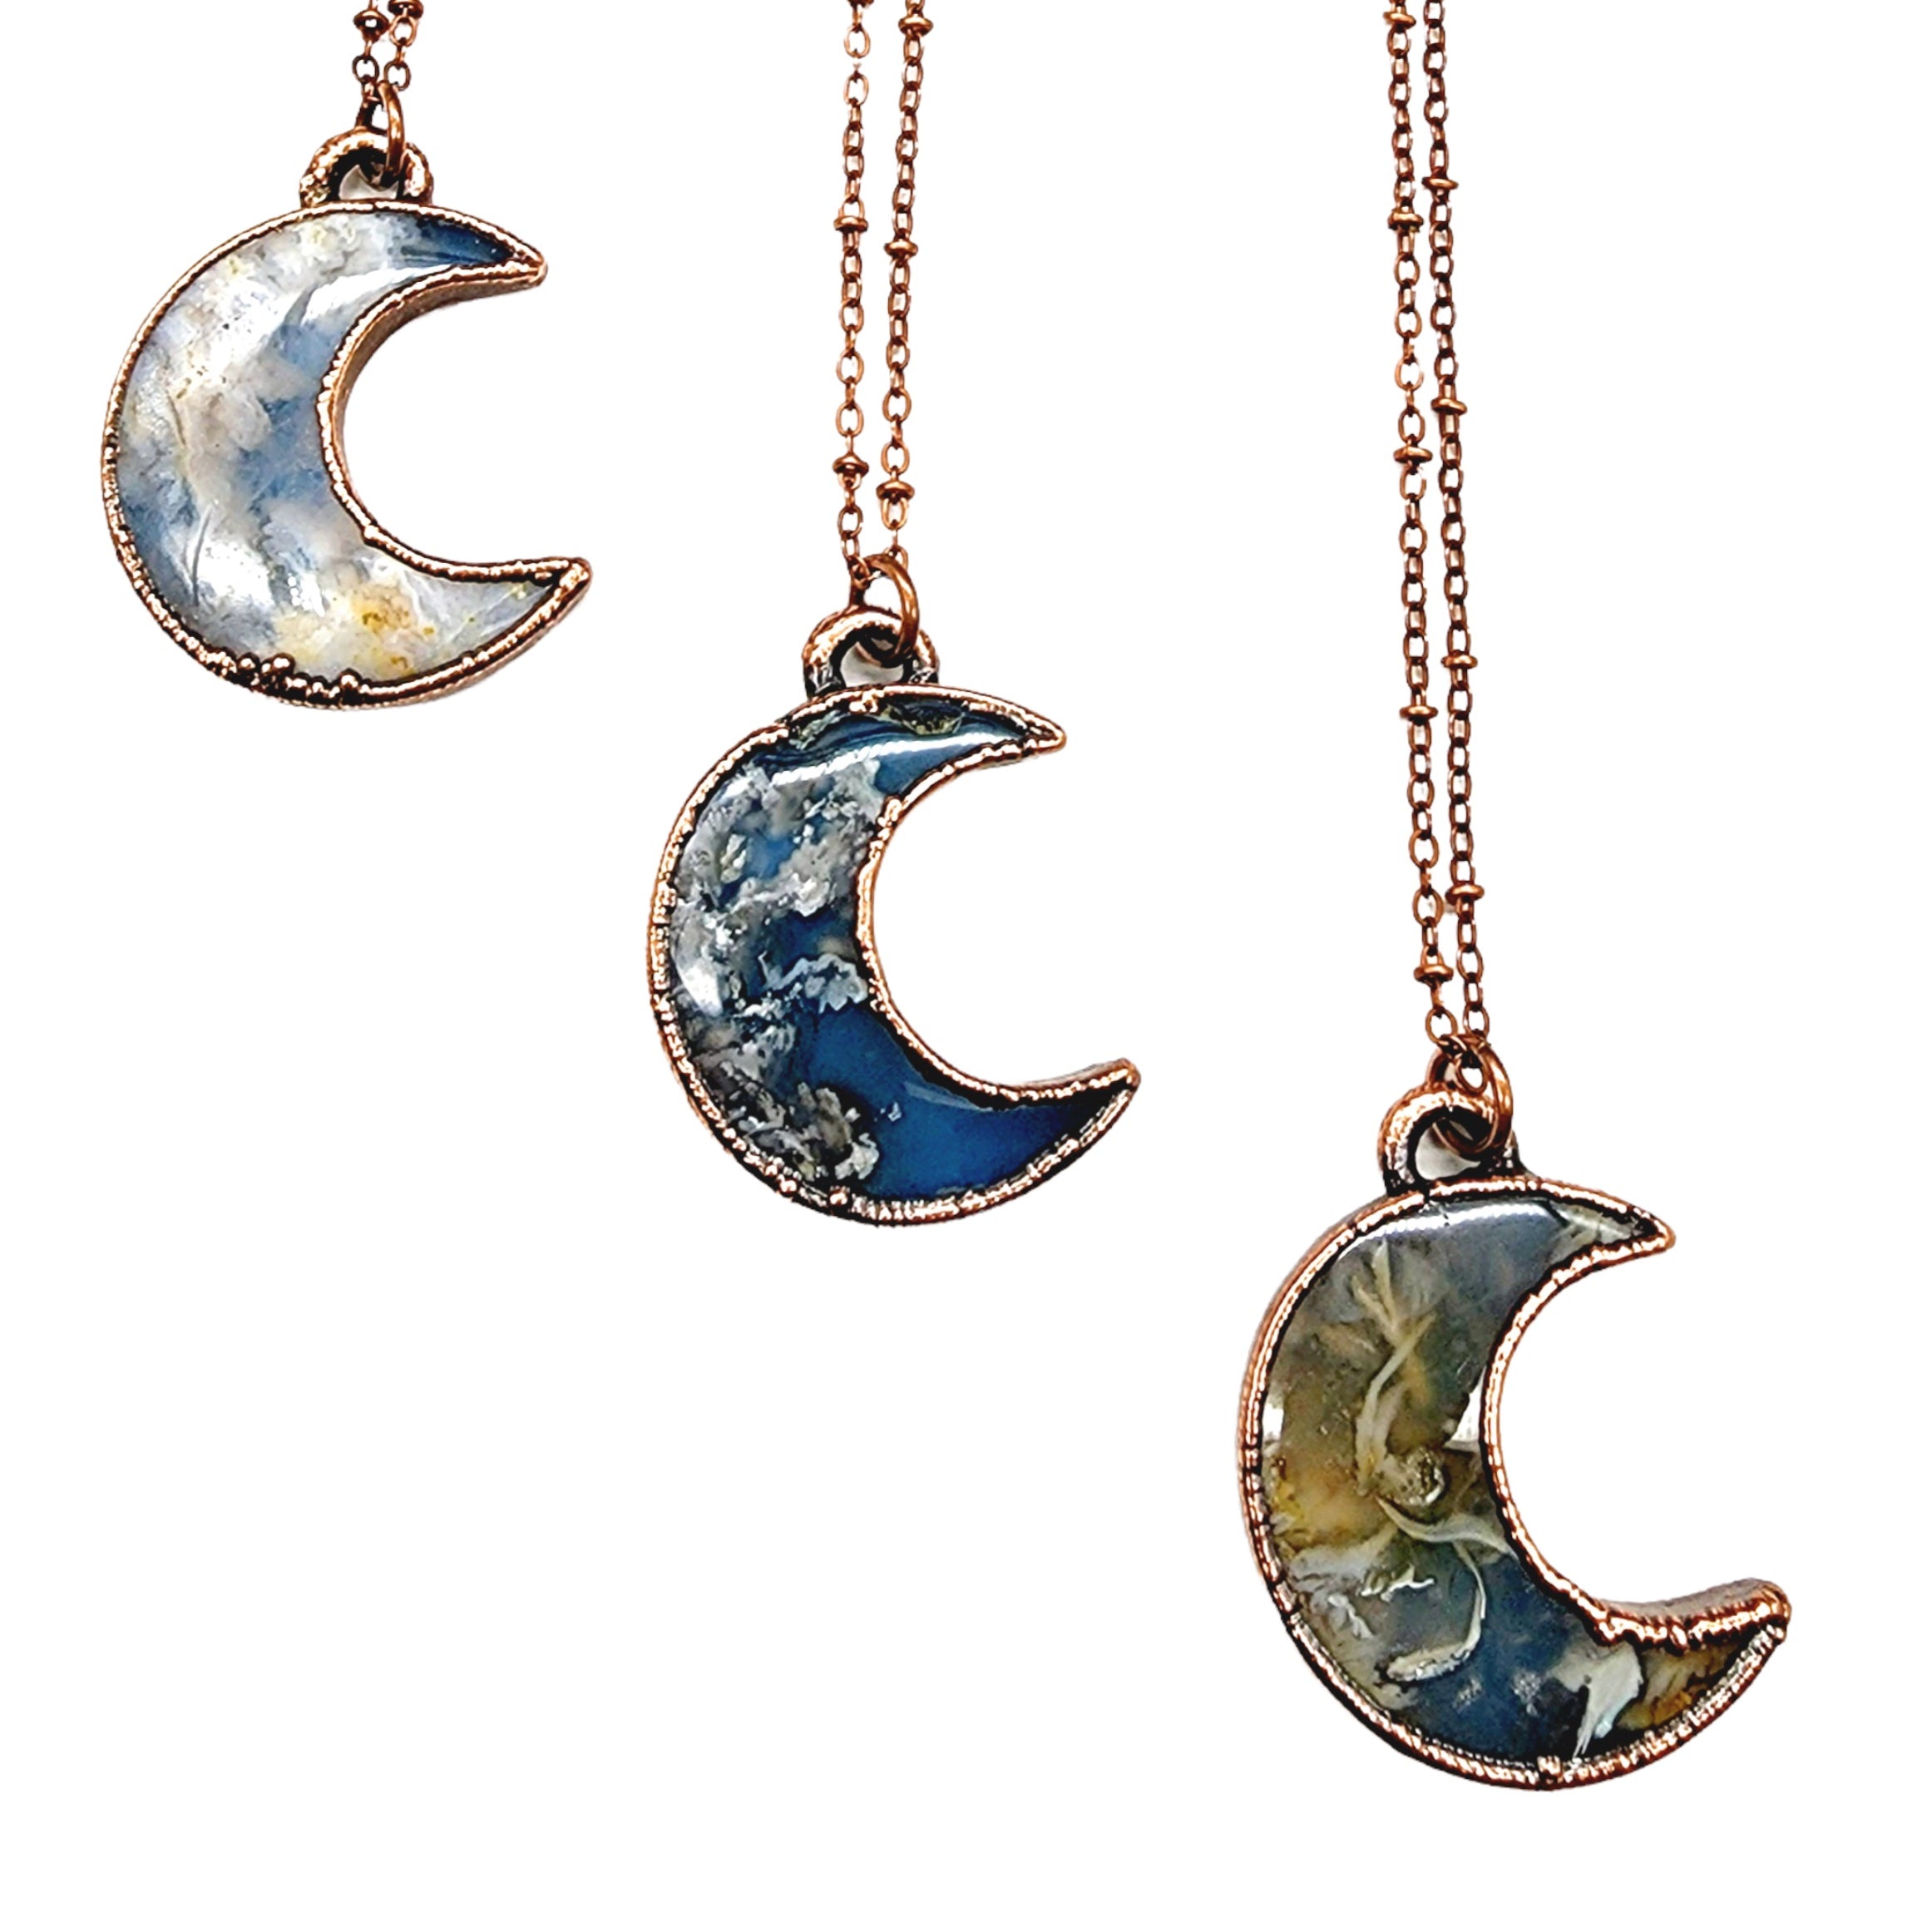 Once in A Blue Moon Crescent Necklace - Antique Copper